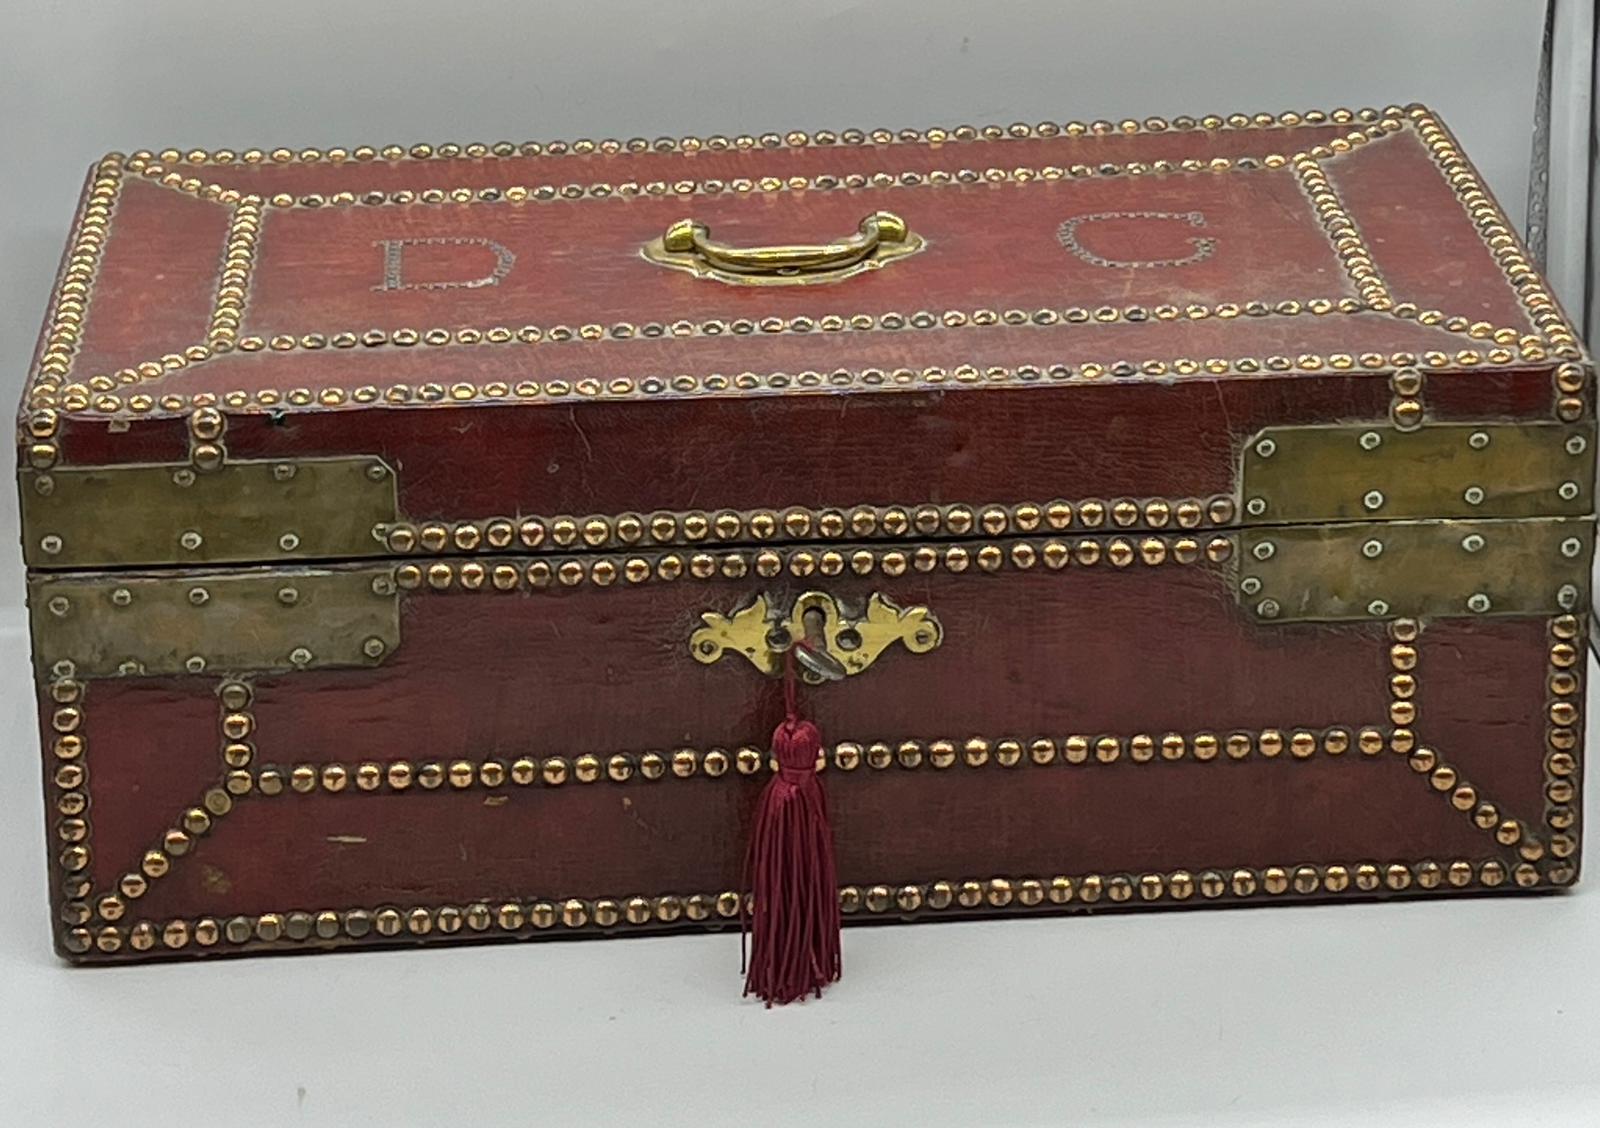 A red leather deed box decorated with studs brass plate corners. The initials DG are embedded with